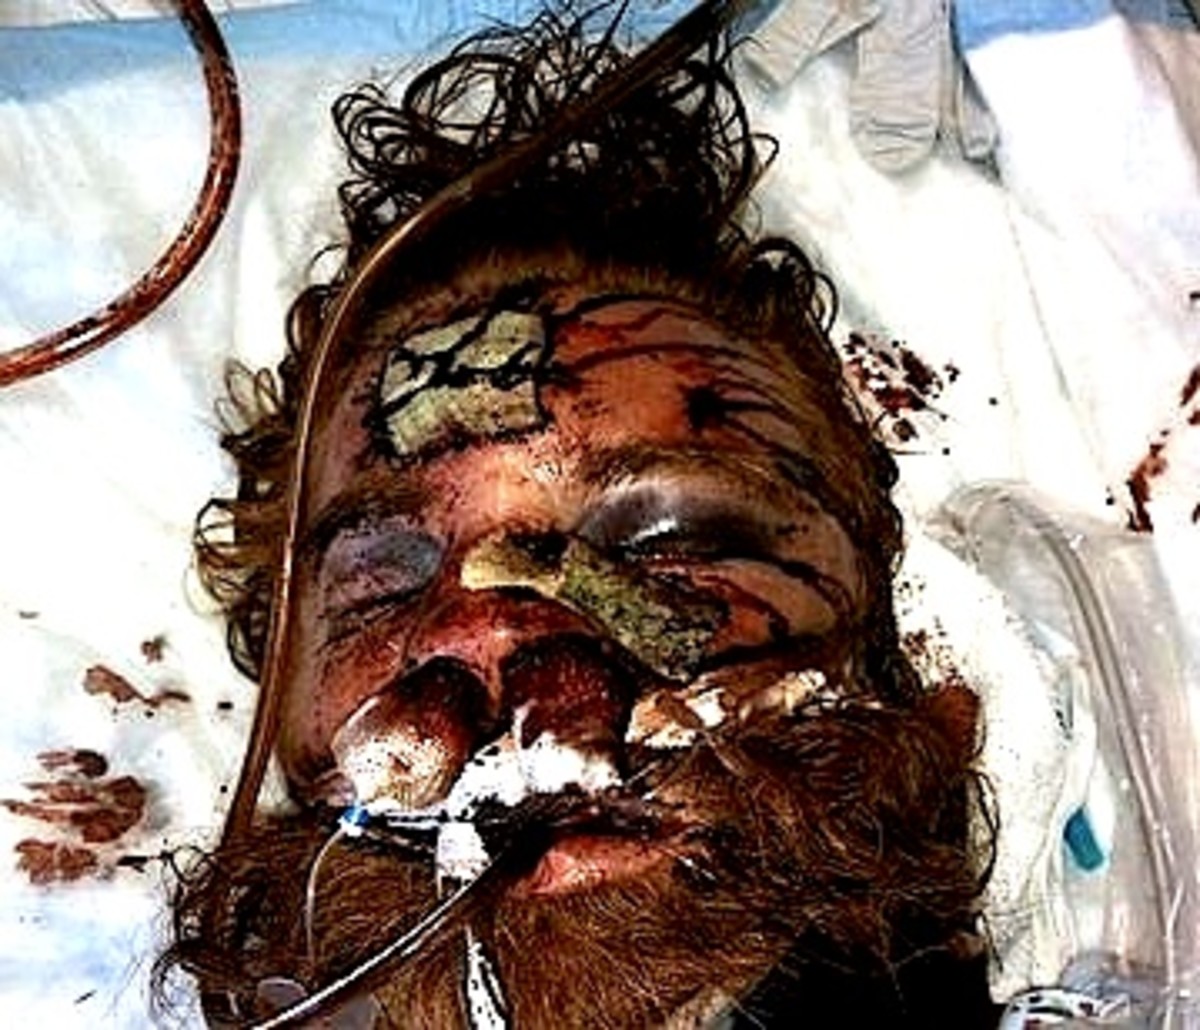 This is how Mr. Thomas looked after his beating as he lay dying in the hospital.